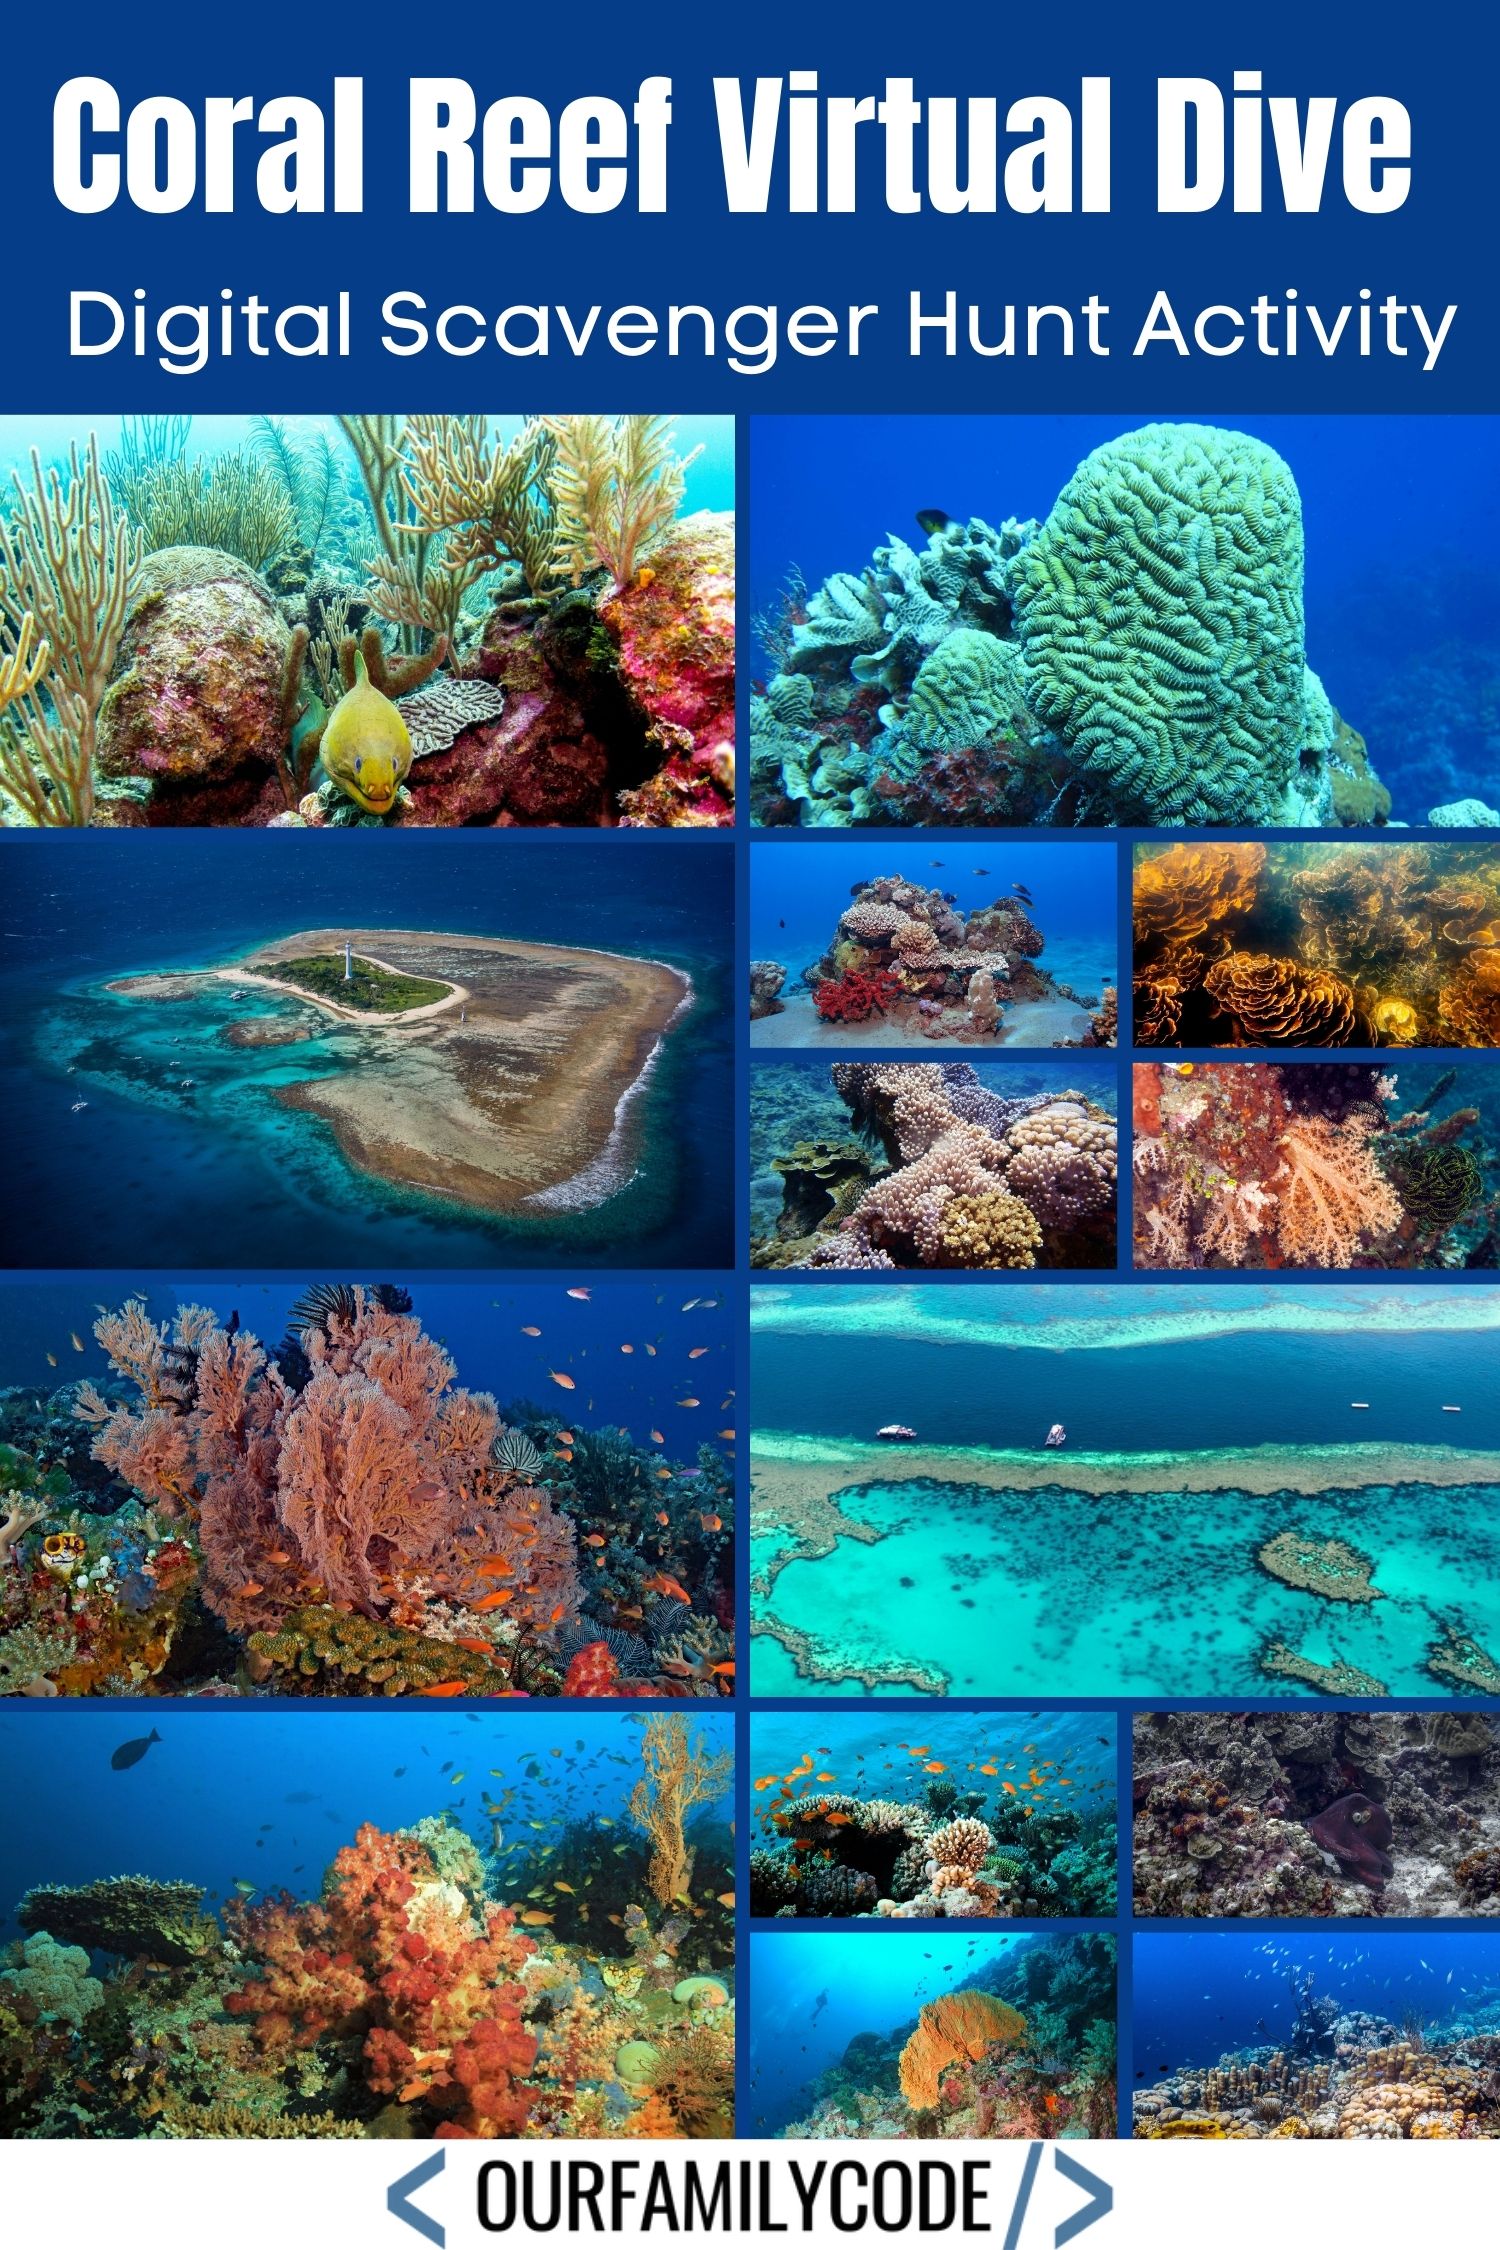 A picture of 14 coral reefs and "Coral Reef Virtual Dive" in white text.